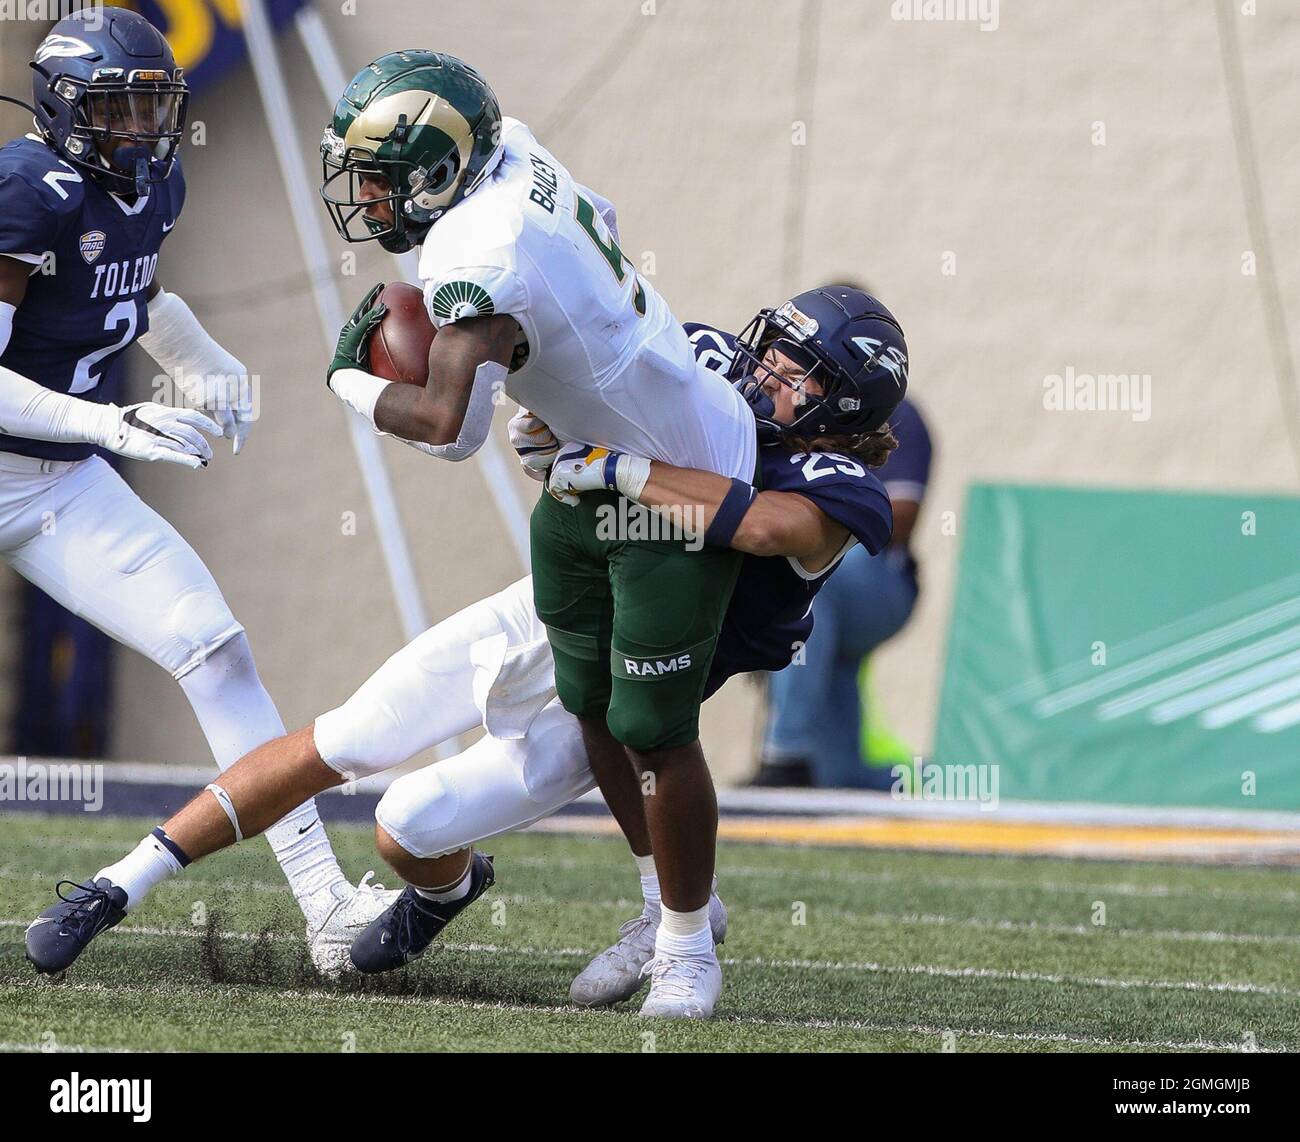 Toledo, OH, USA. 18th Sep, 2021. Toledo's Maxen Hook #25 tackles Colorado State's David Bailey #5 during the NCAA football game between the Toledo Rockets and the Colorado State rams at the Glass Bowl in Toledo, OH. Kyle Okita/CSM/Alamy Live News Stock Photo